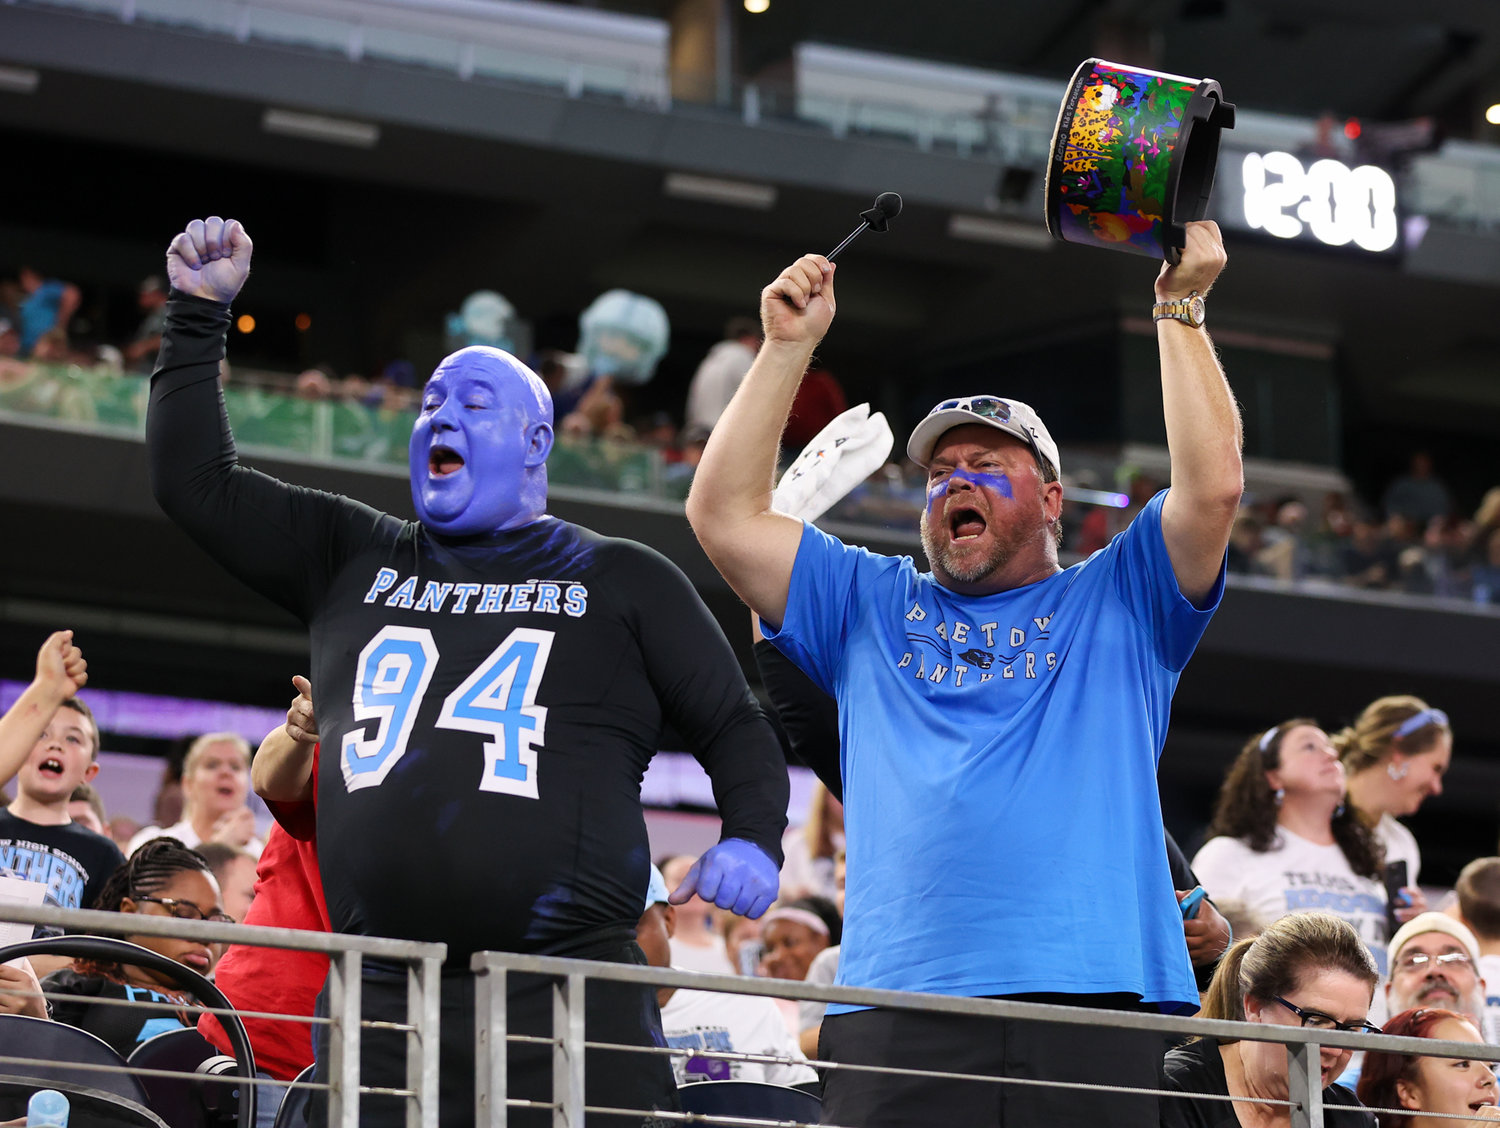 Paetow Panthers fans during the Class 5A-Division I state football championship game between Paetow and College Station on December 17, 2021 in Arlington, Texas.